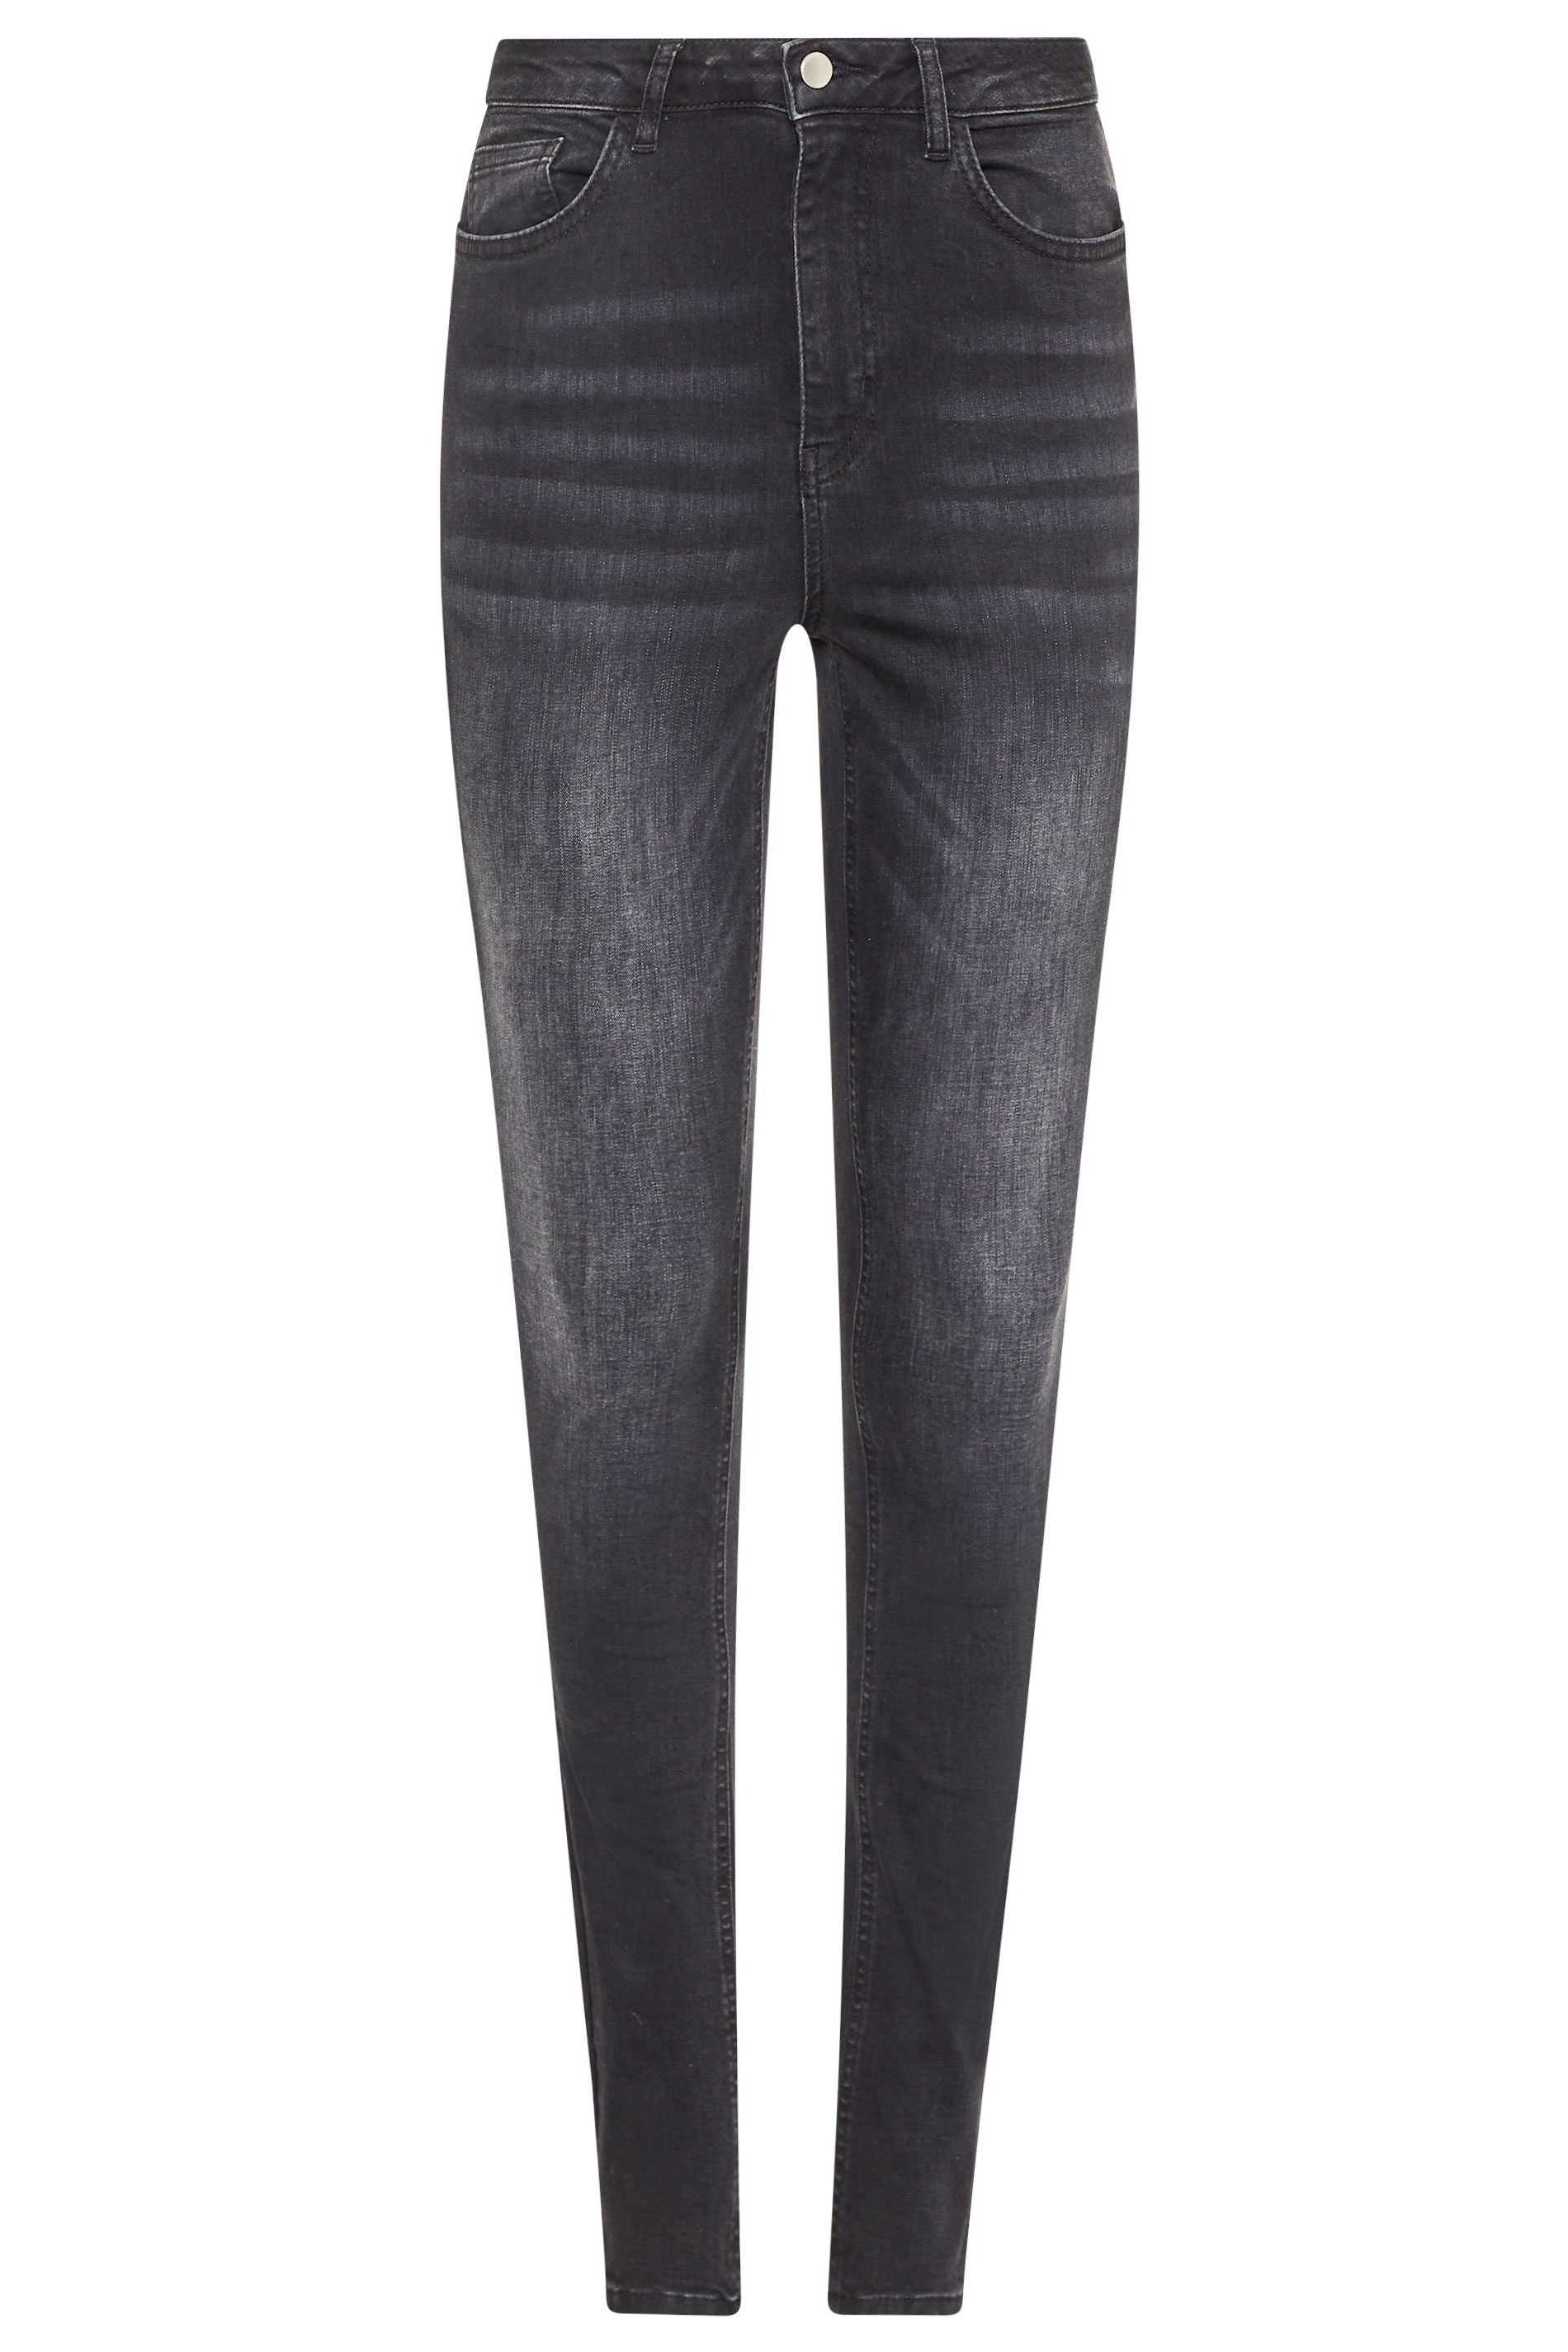 Washed Black Ultra Stretch Skinny Jeans | Long Tall Sally